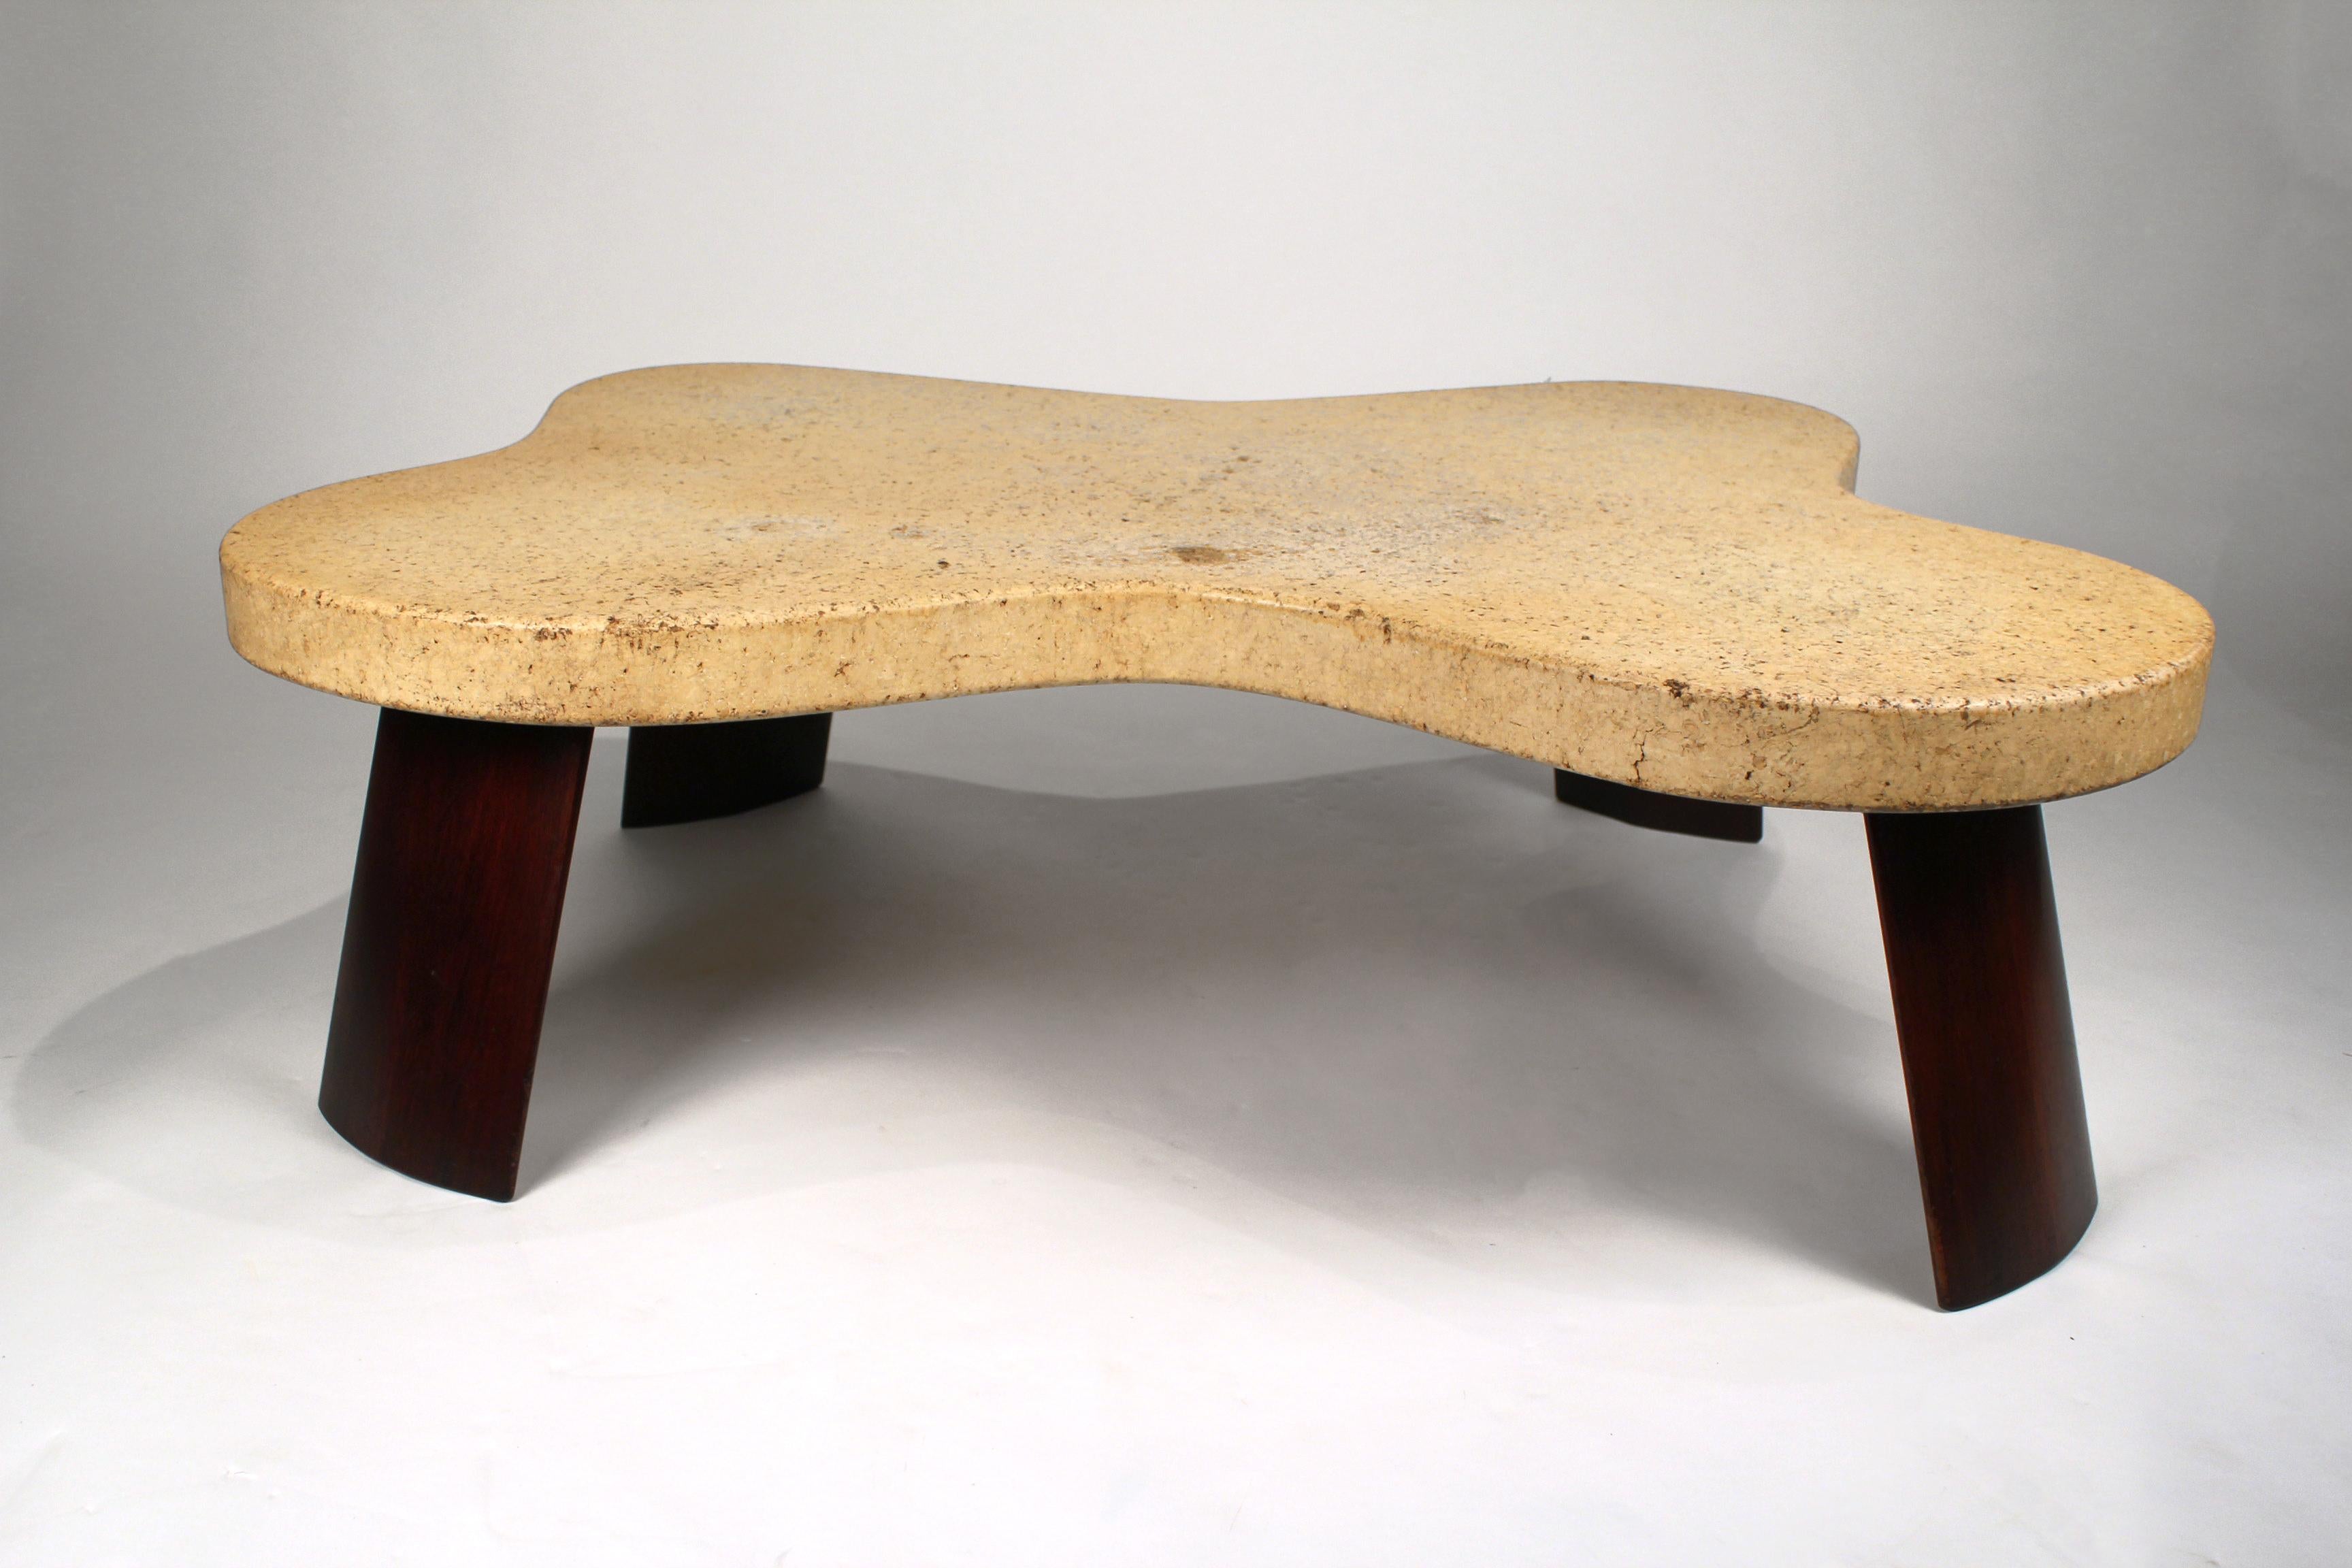 Lacquered Paul Frankl Cork Top Amoeba Coffee Table for Johnson Furniture